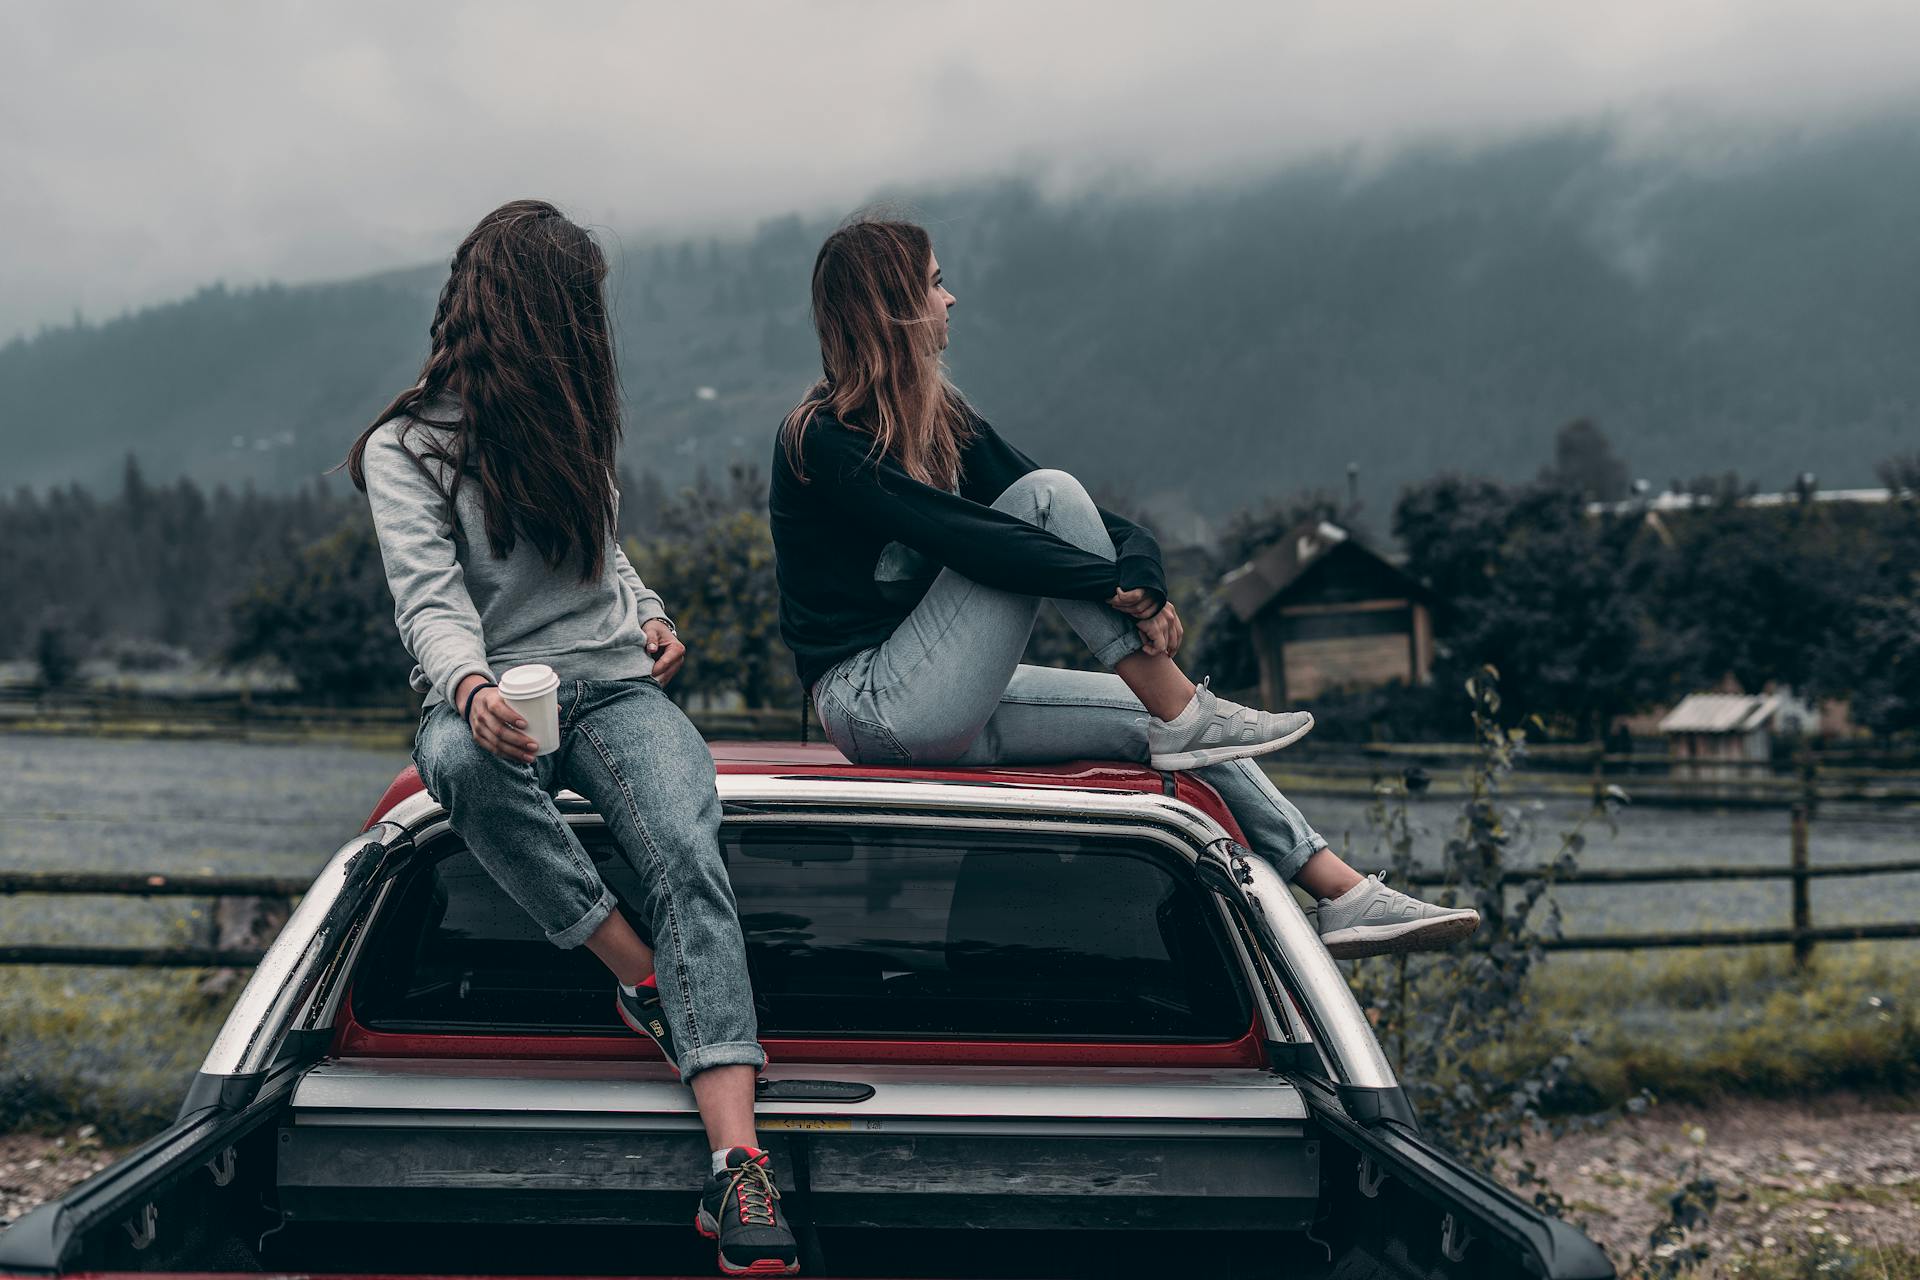 Two women sitting on a vehicle roof | Source: Pexels